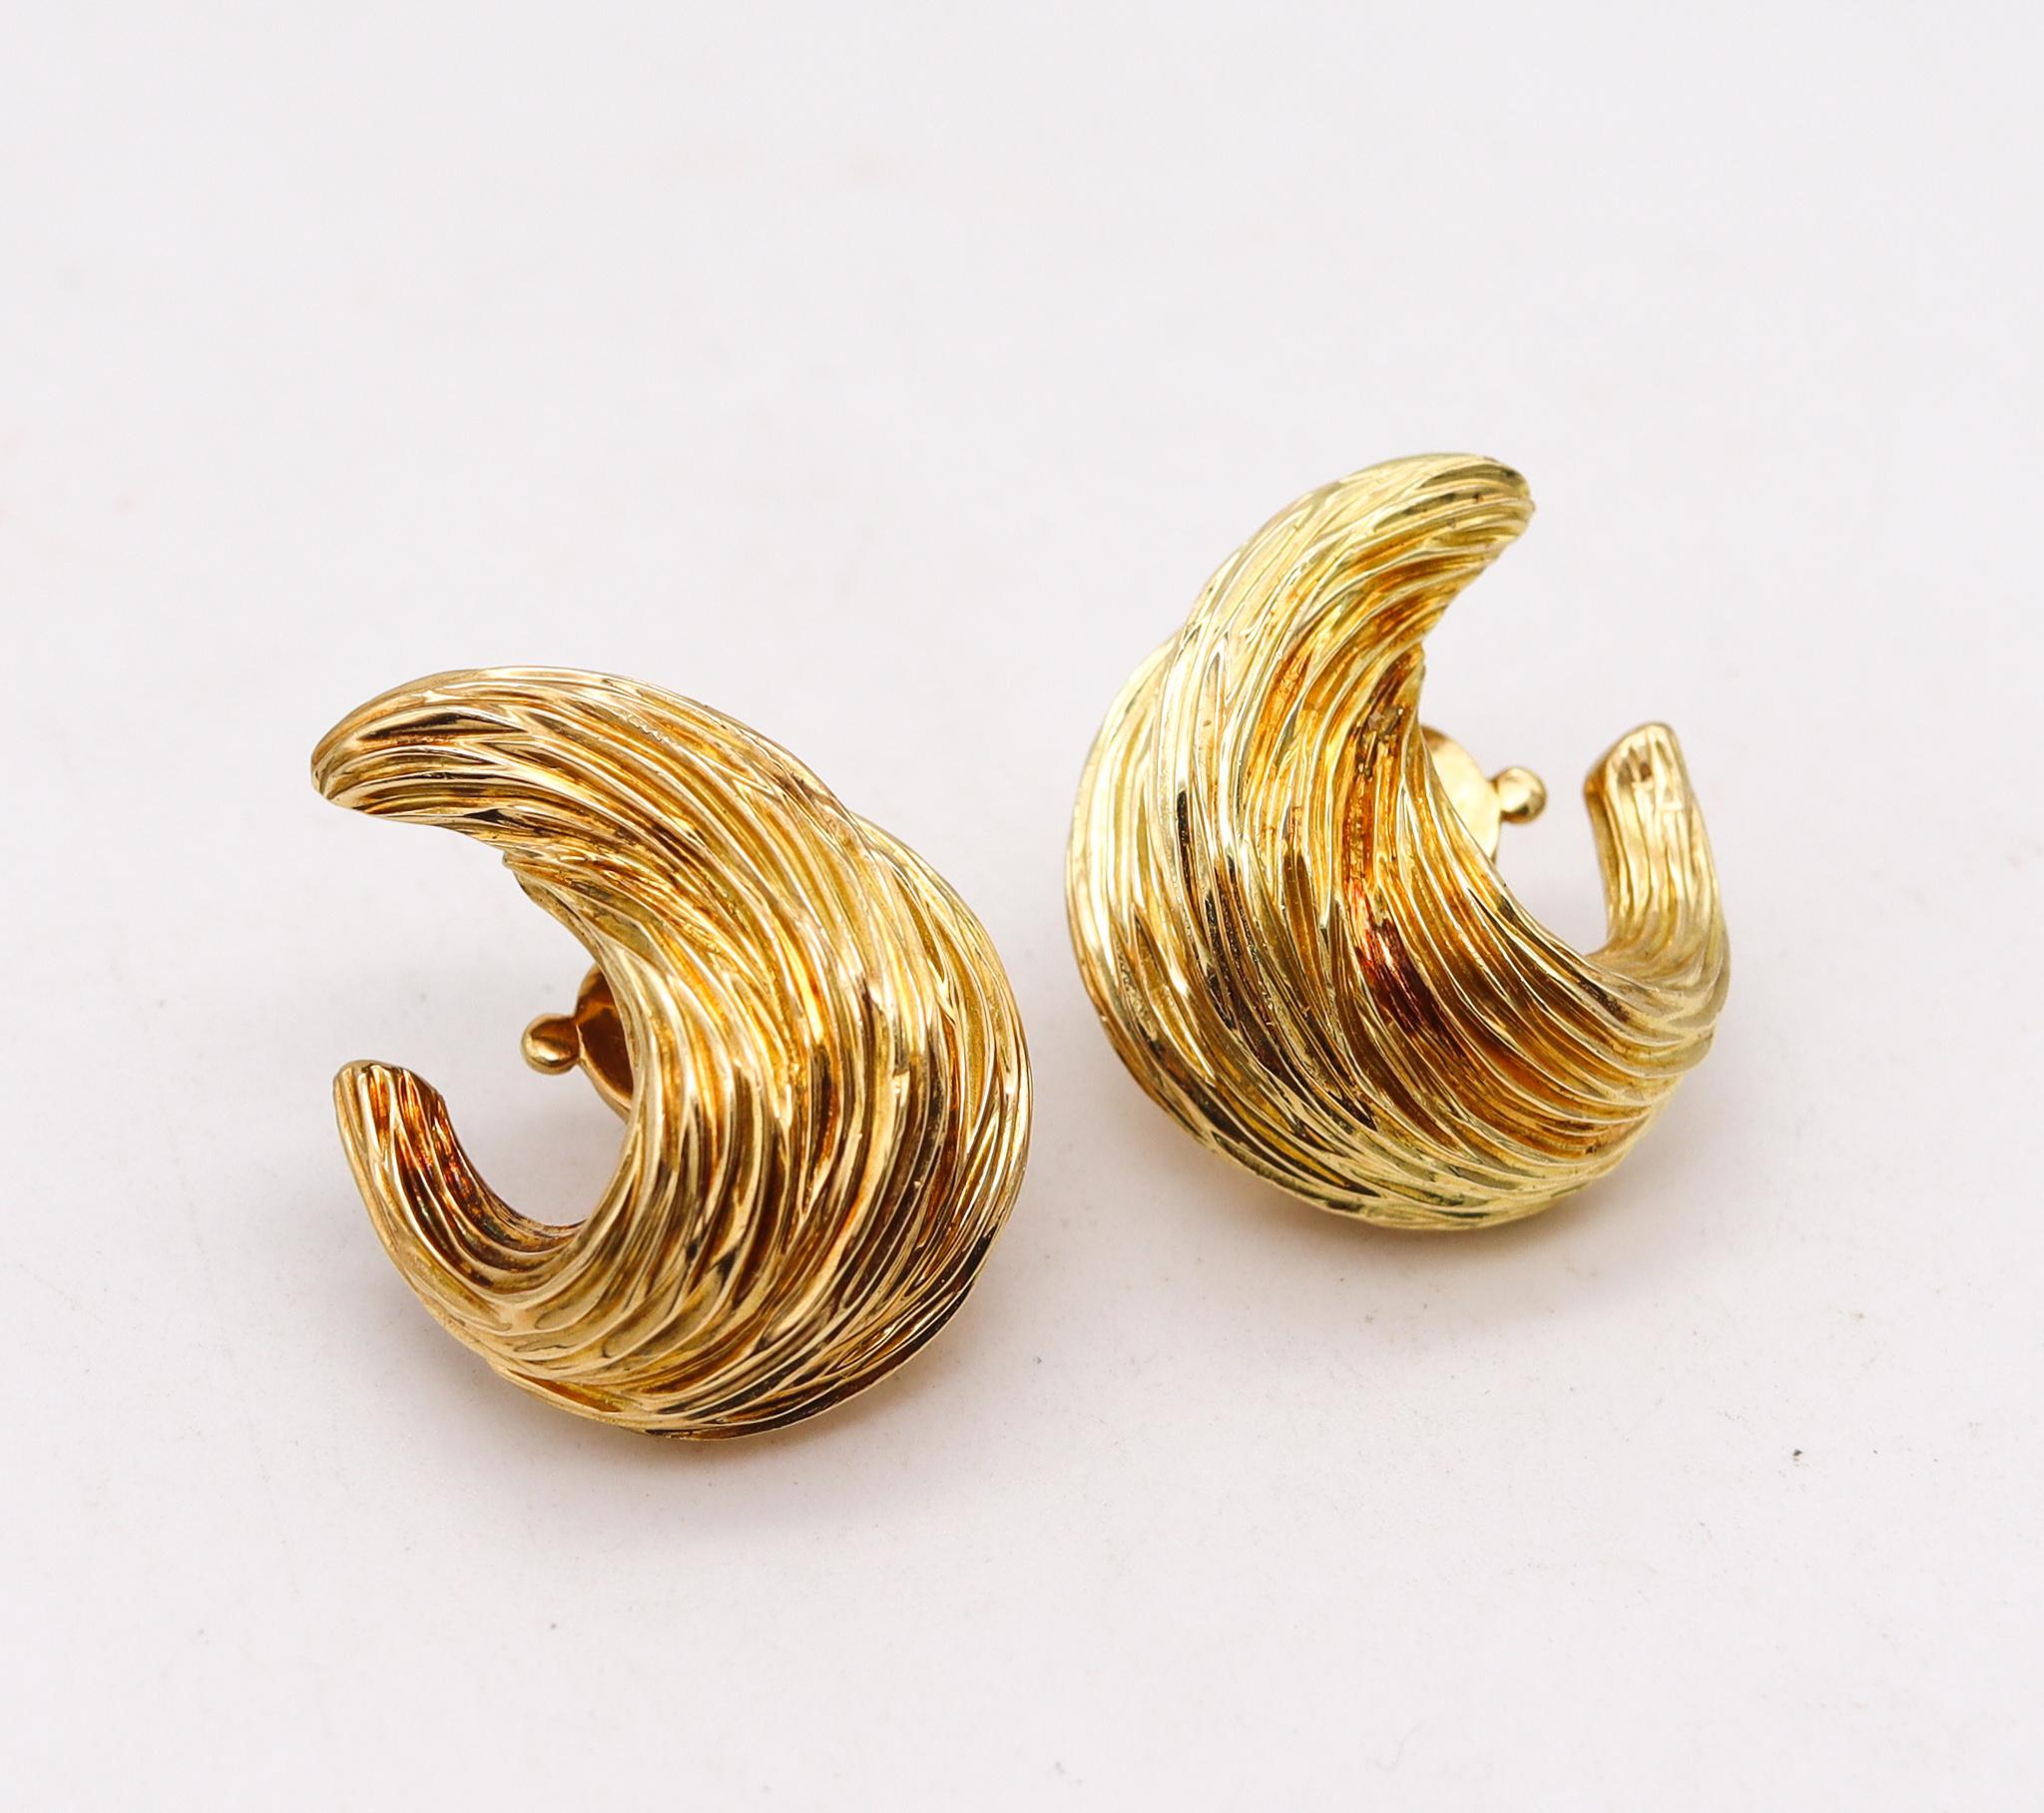 Textured earrings designed by Fred Paris.

Beautiful every day pair, created in Paris France by the jewelry house of Fred, back in the late 1960. These pieces has been crafted in the shape of flames in solid rich yellow gold of 18 karats with highly